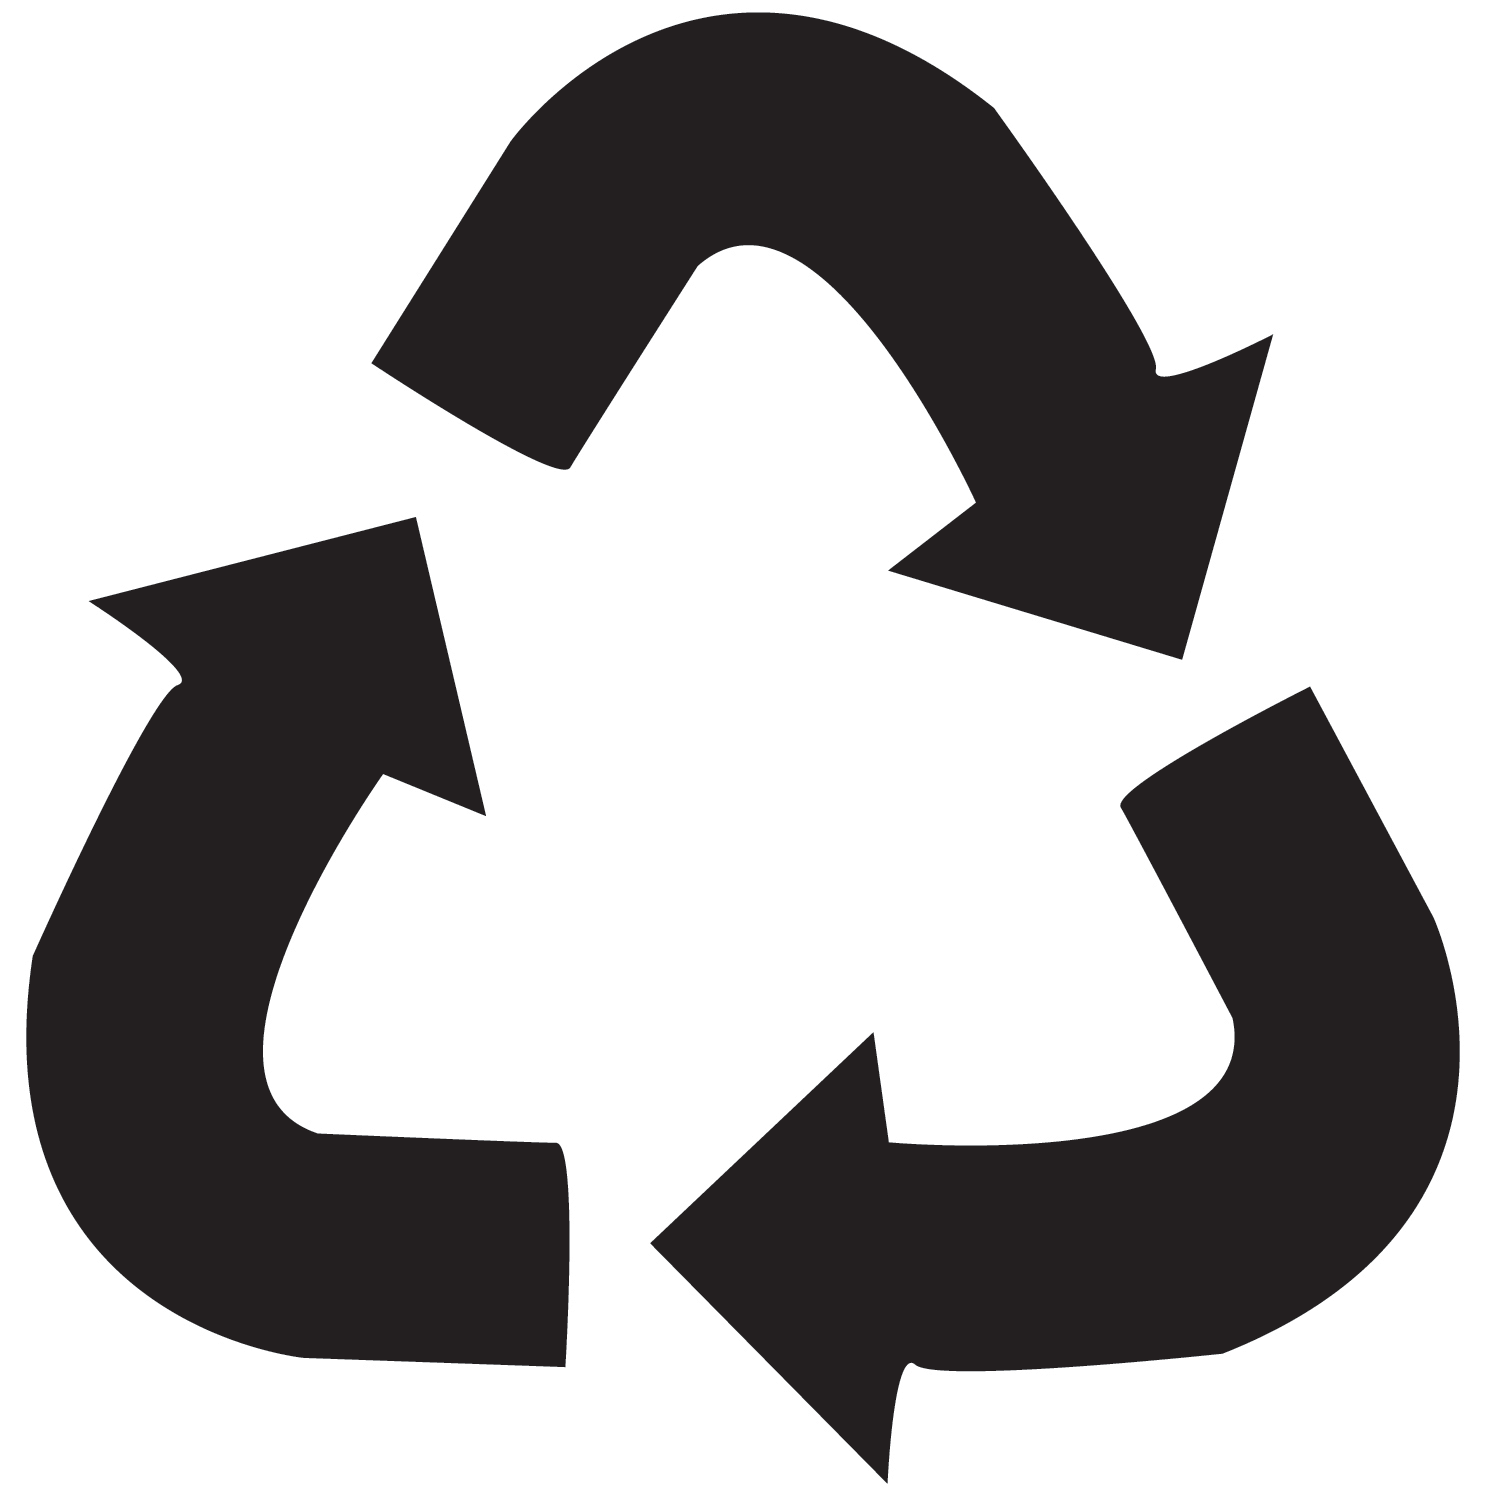 Black Recycle Logo - Free Recycle Symbol, Download Free Clip Art, Free Clip Art on ...